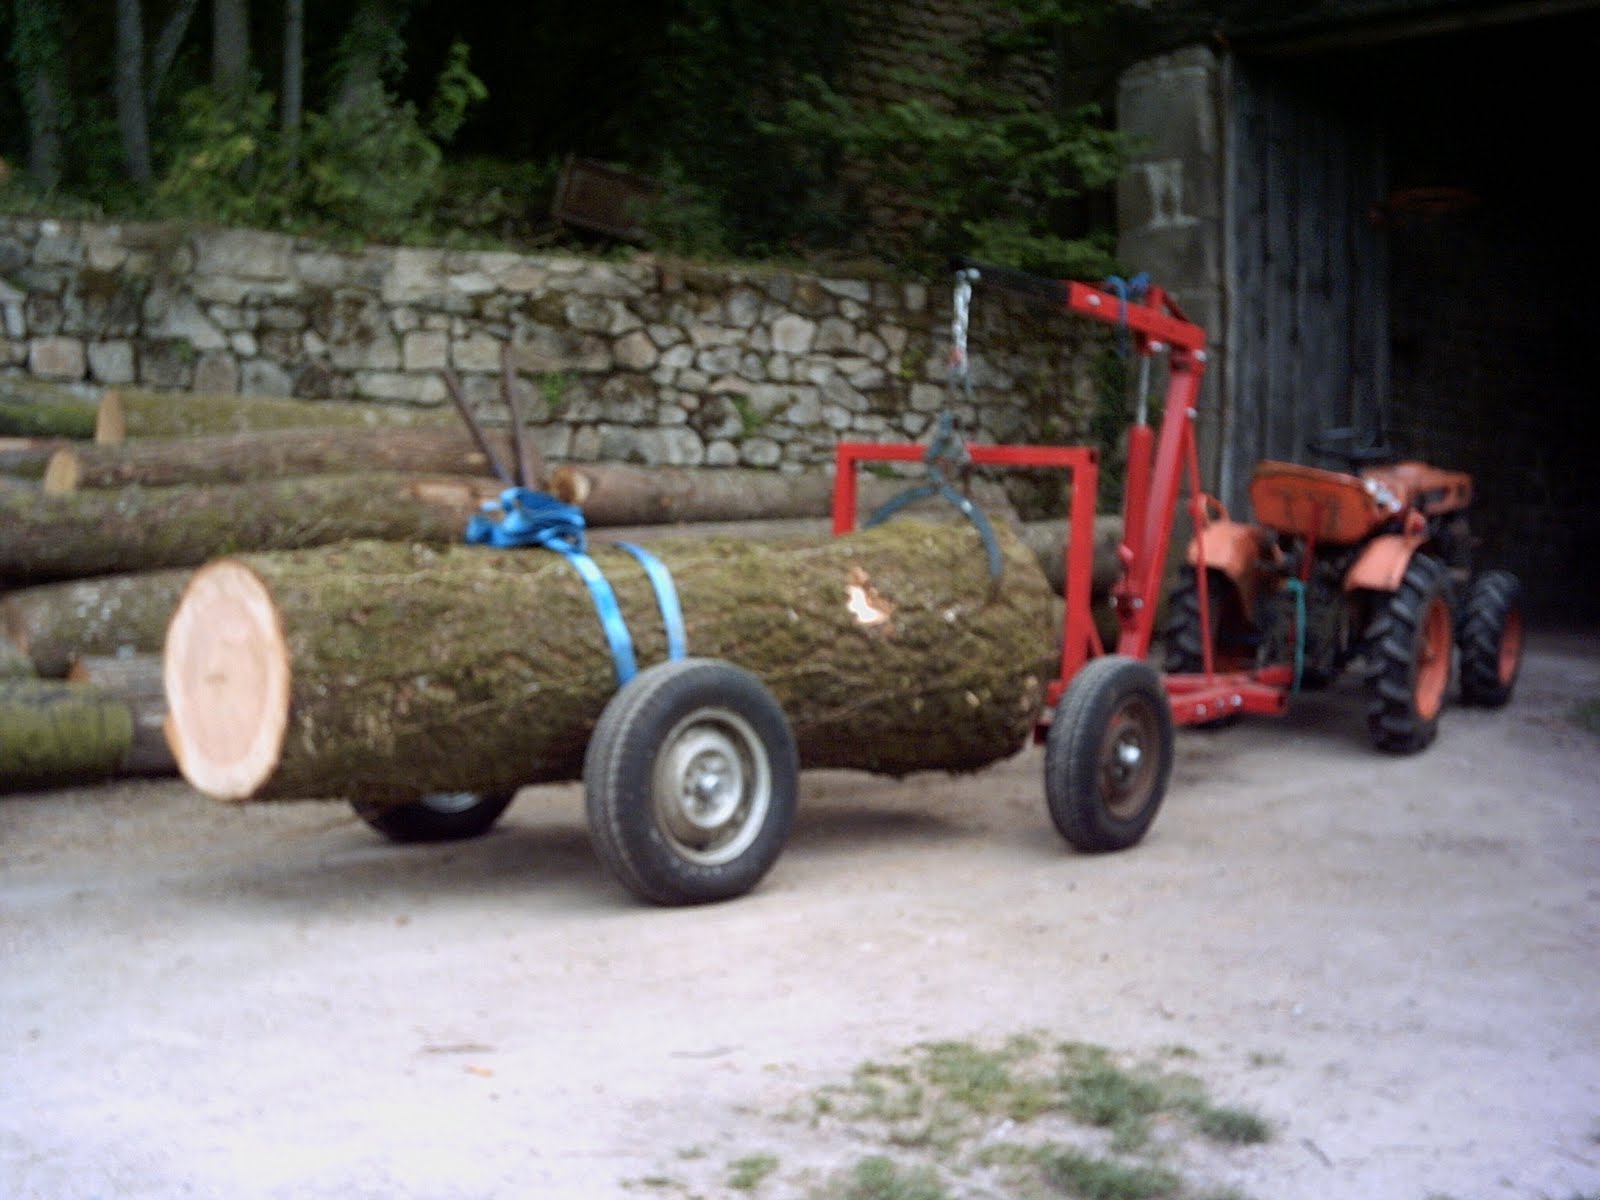 arco per trasporto tronchi Bringing+BIG+logs+home+with+home+made+trailer+5thMay+2009+002